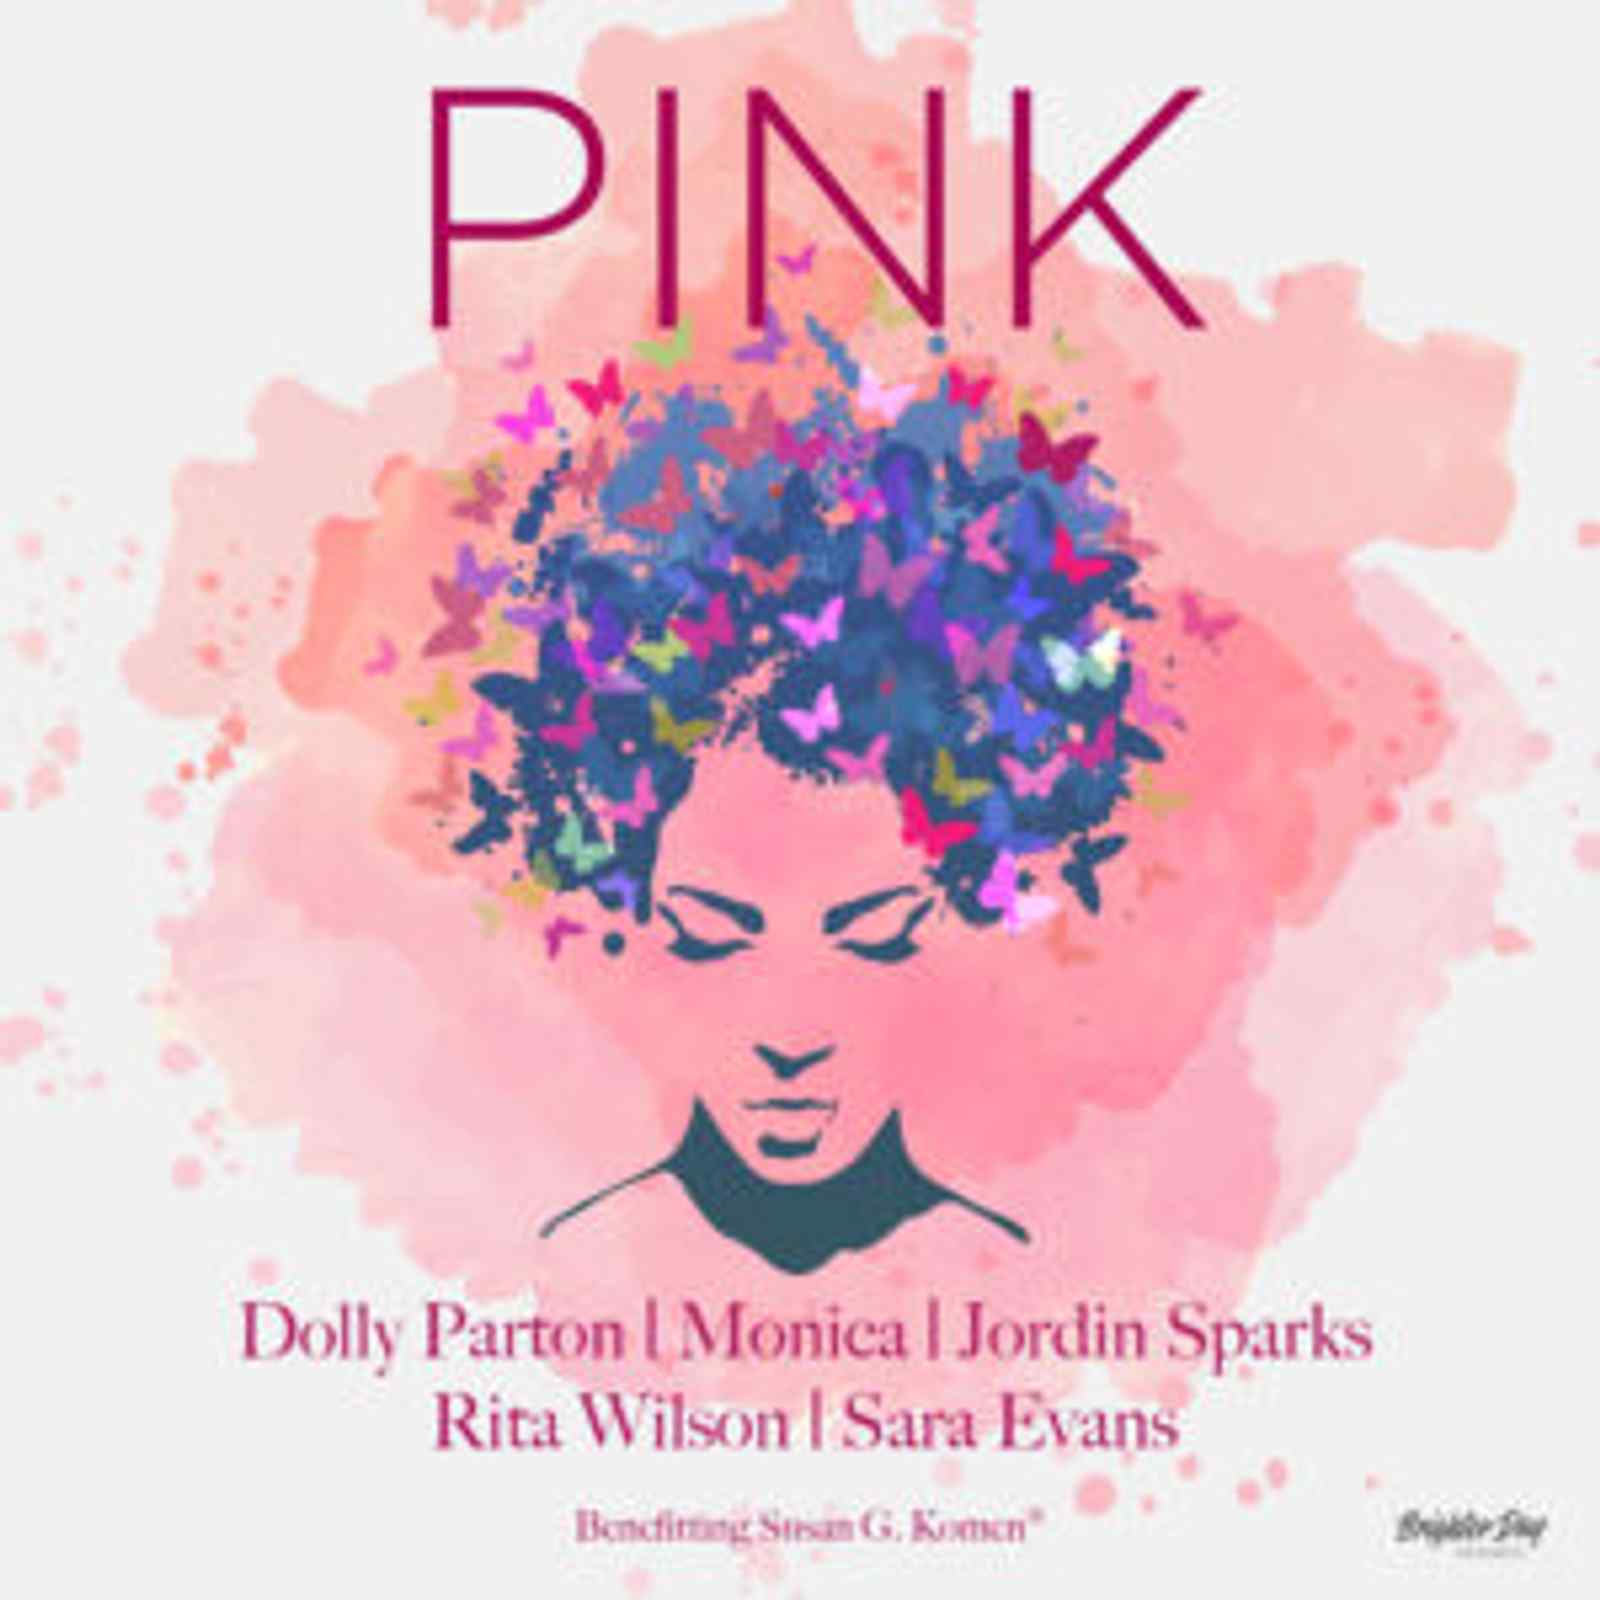 'PINK' Song by Dolly Parton, Monica, Jordin Sparks, Sara Evans and Rita Wilson